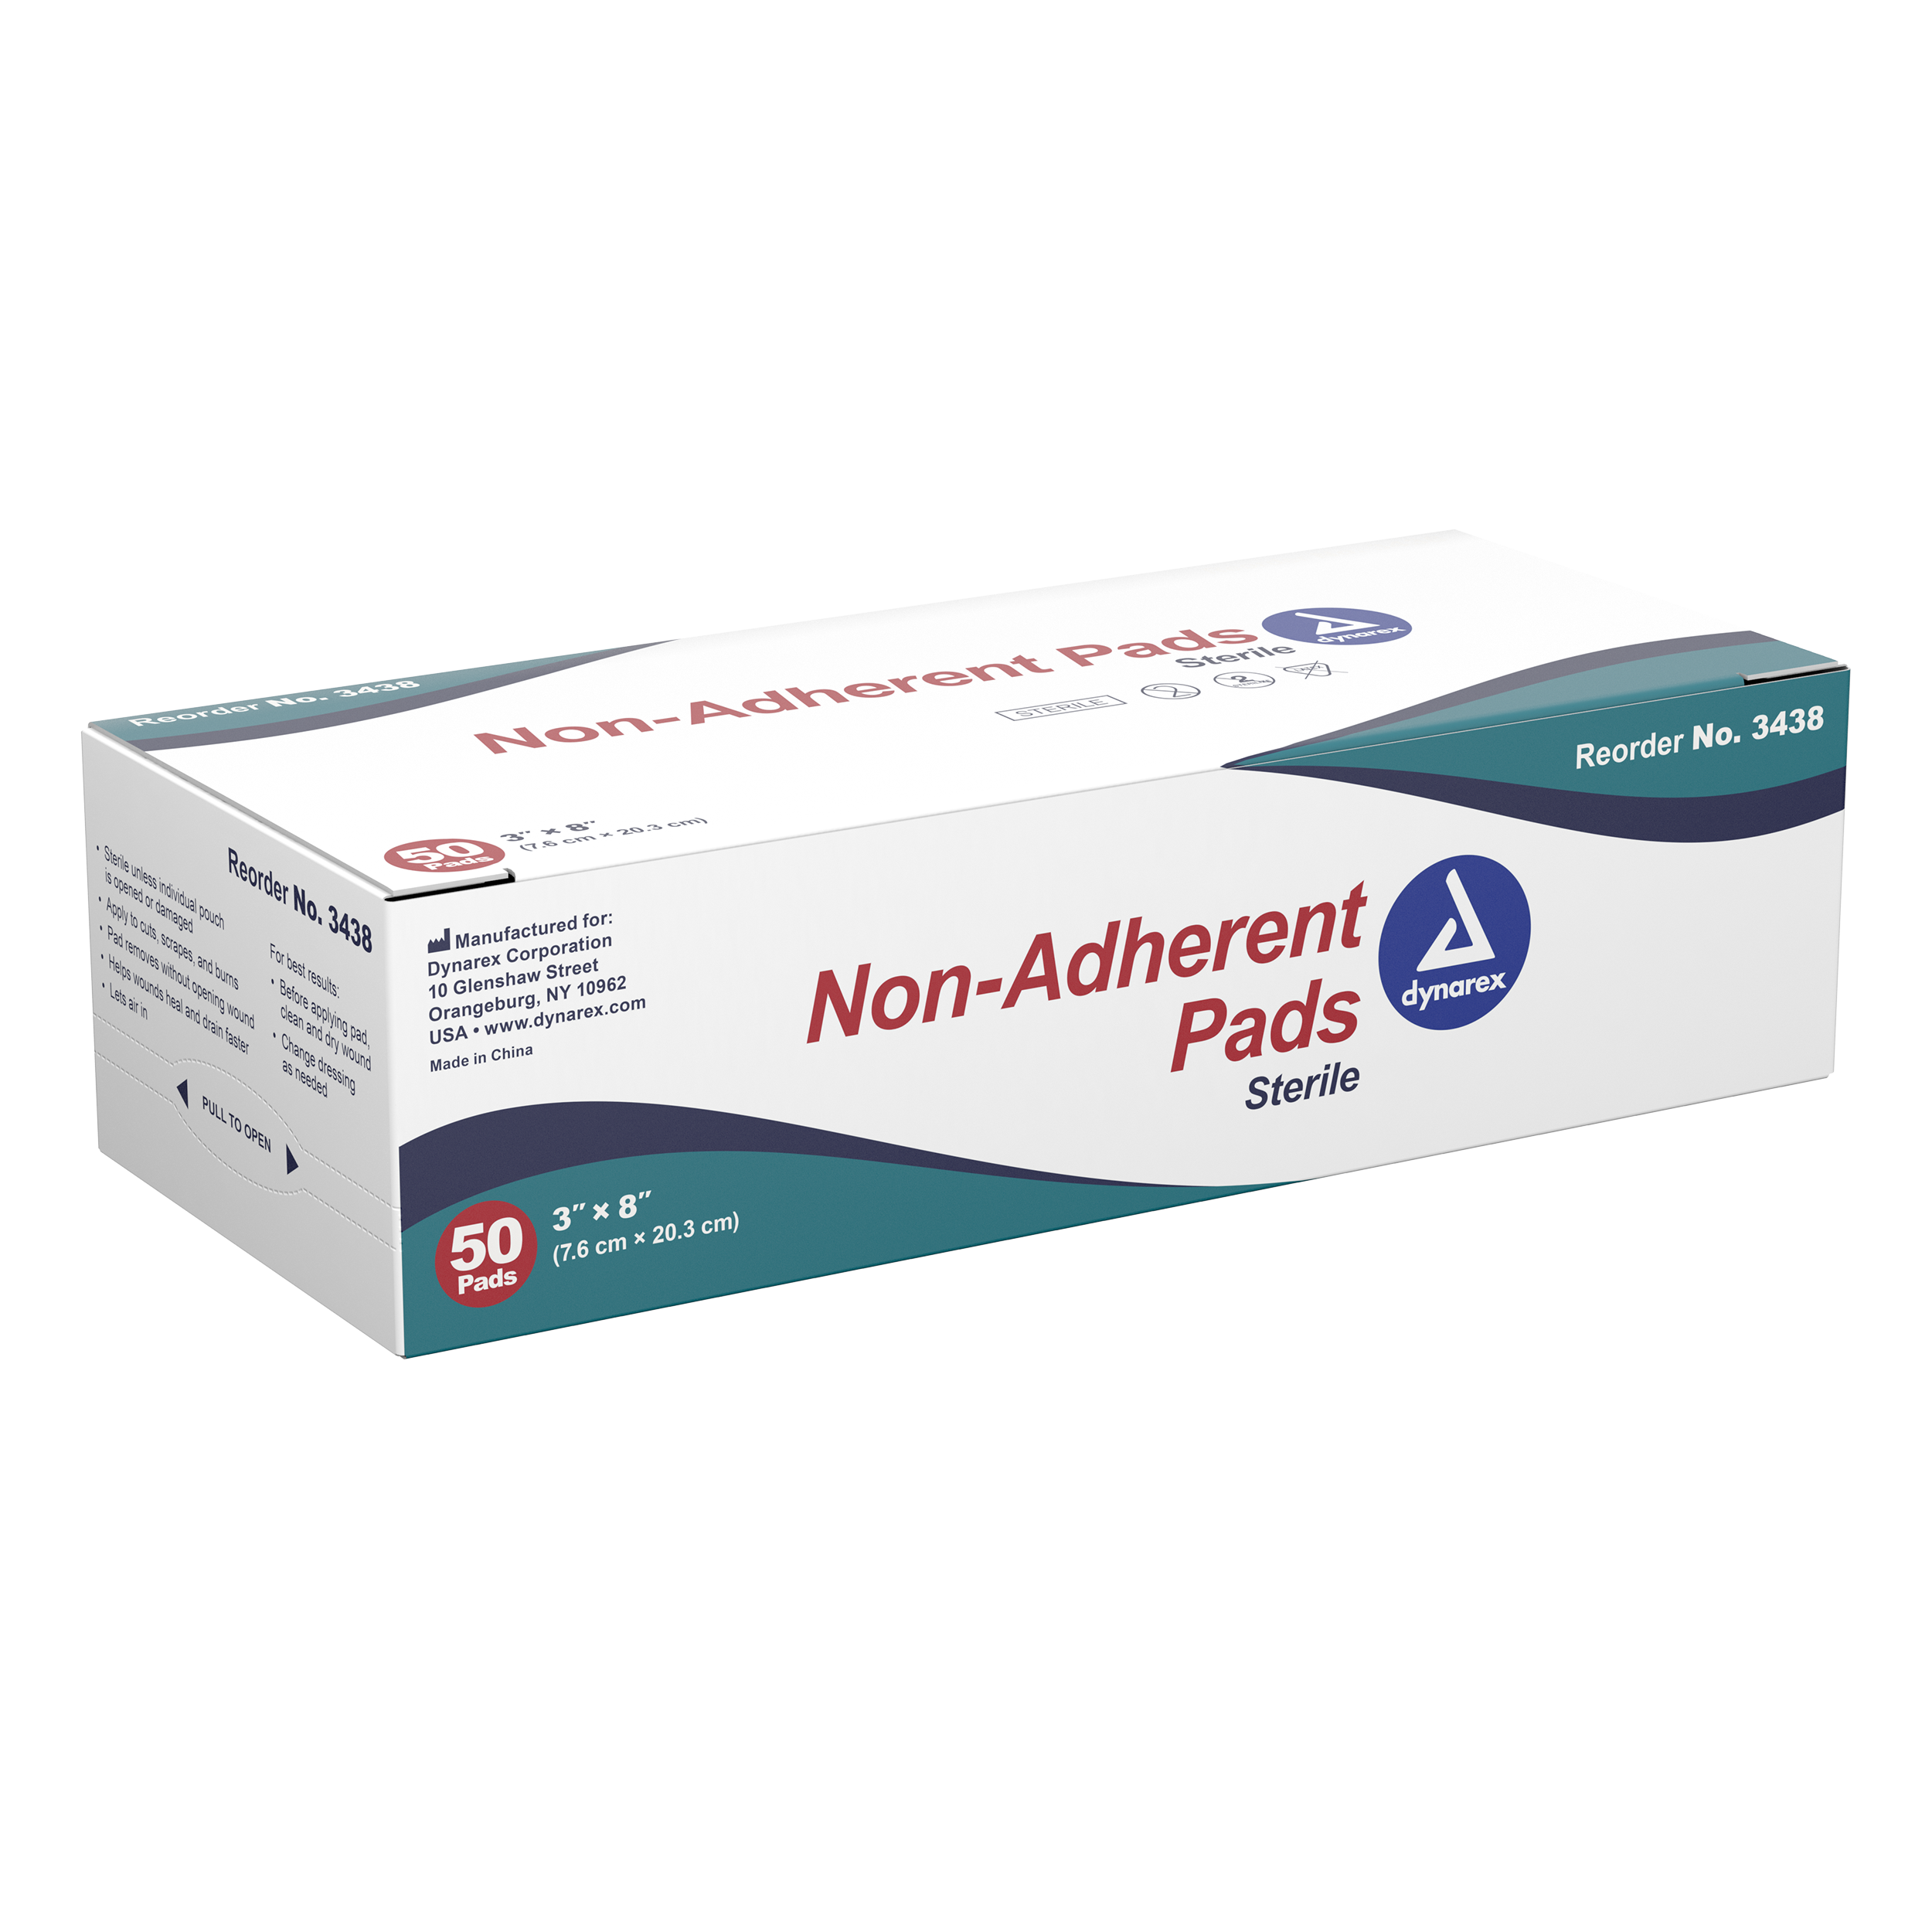 Non-Adherent Pads Sterile, 3